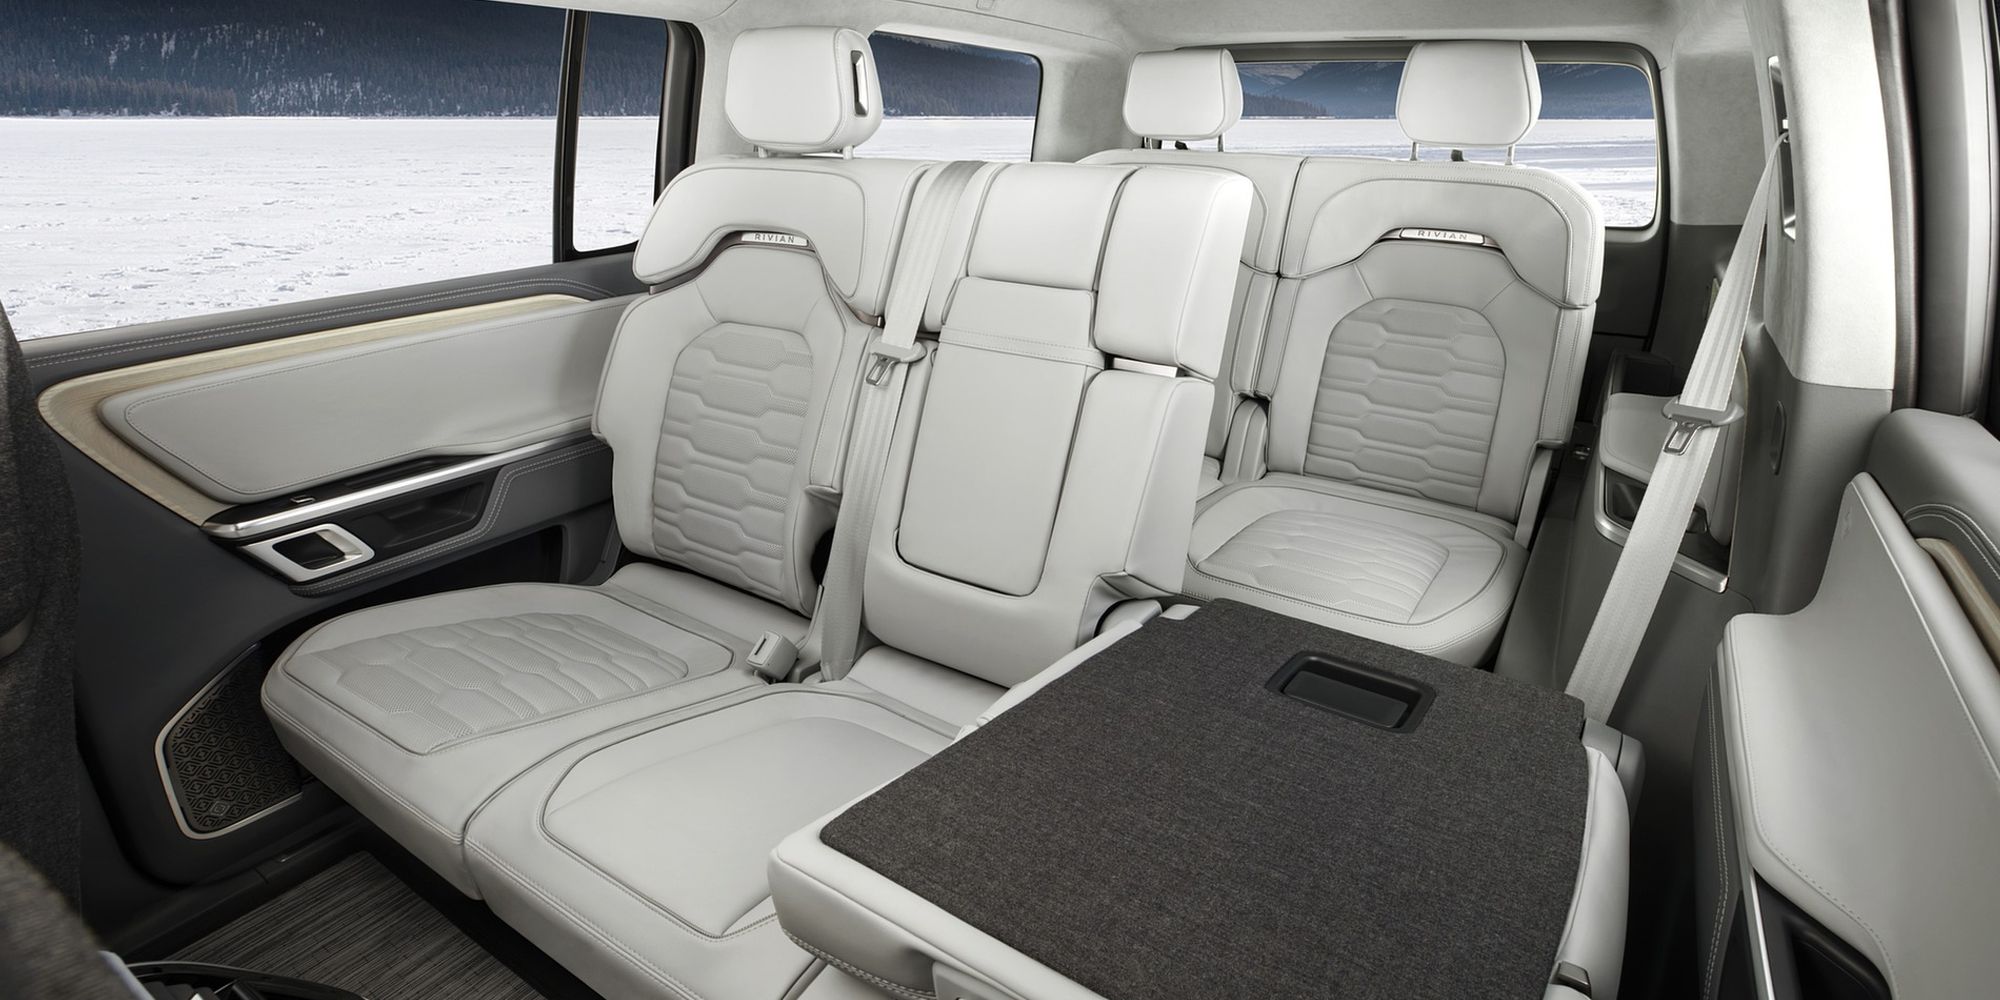 The rear seats in the R1S, driver's side folded down